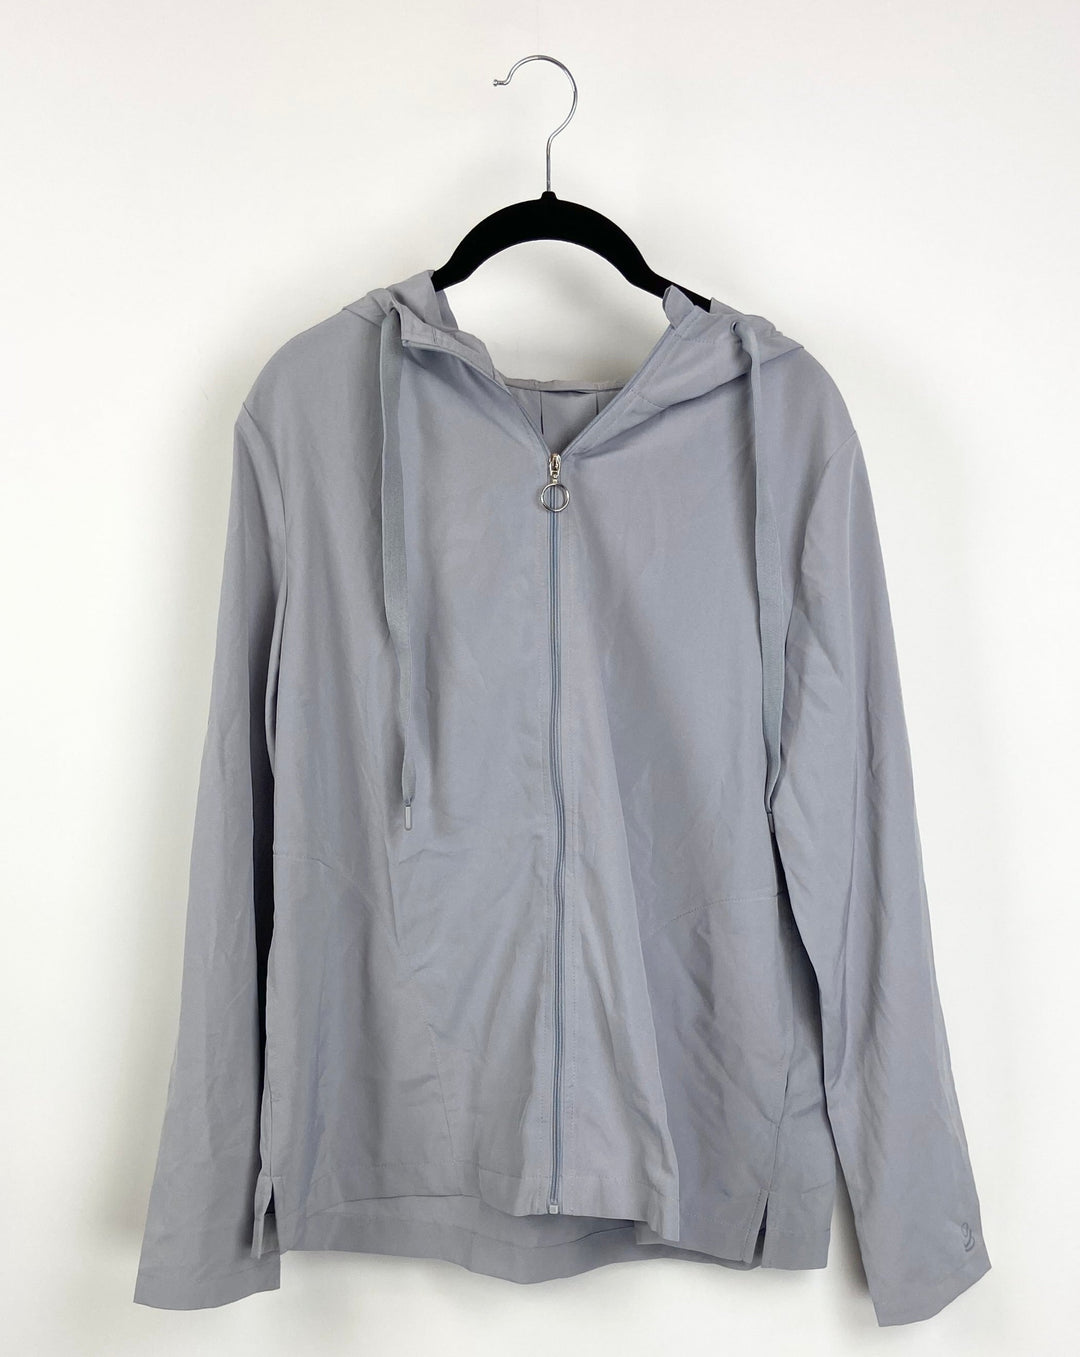 Light Gray Athletic Zip-Up with Hood - Size 6/8